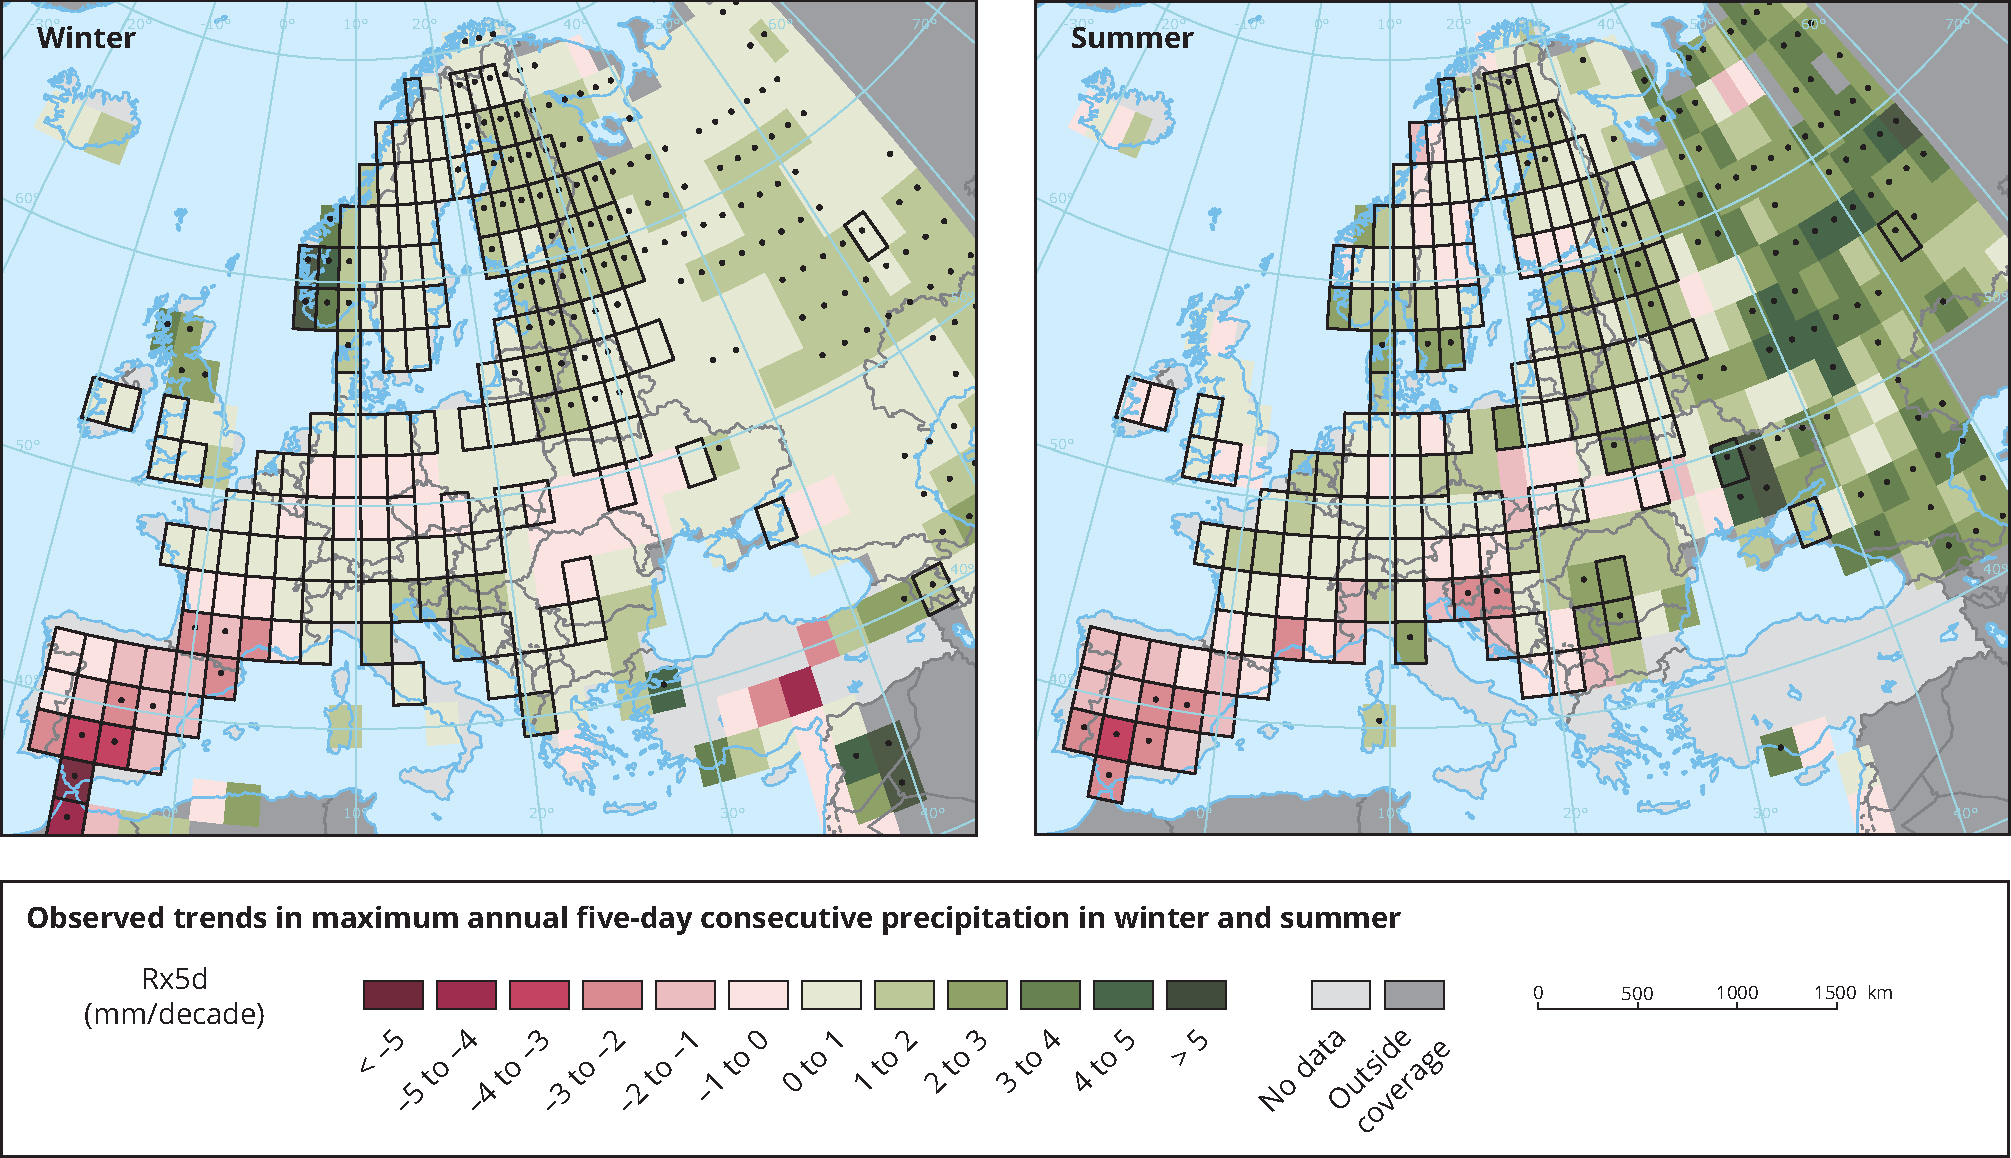 Observed trends in maximum annual five-day consecutive precipitation in winter and summer